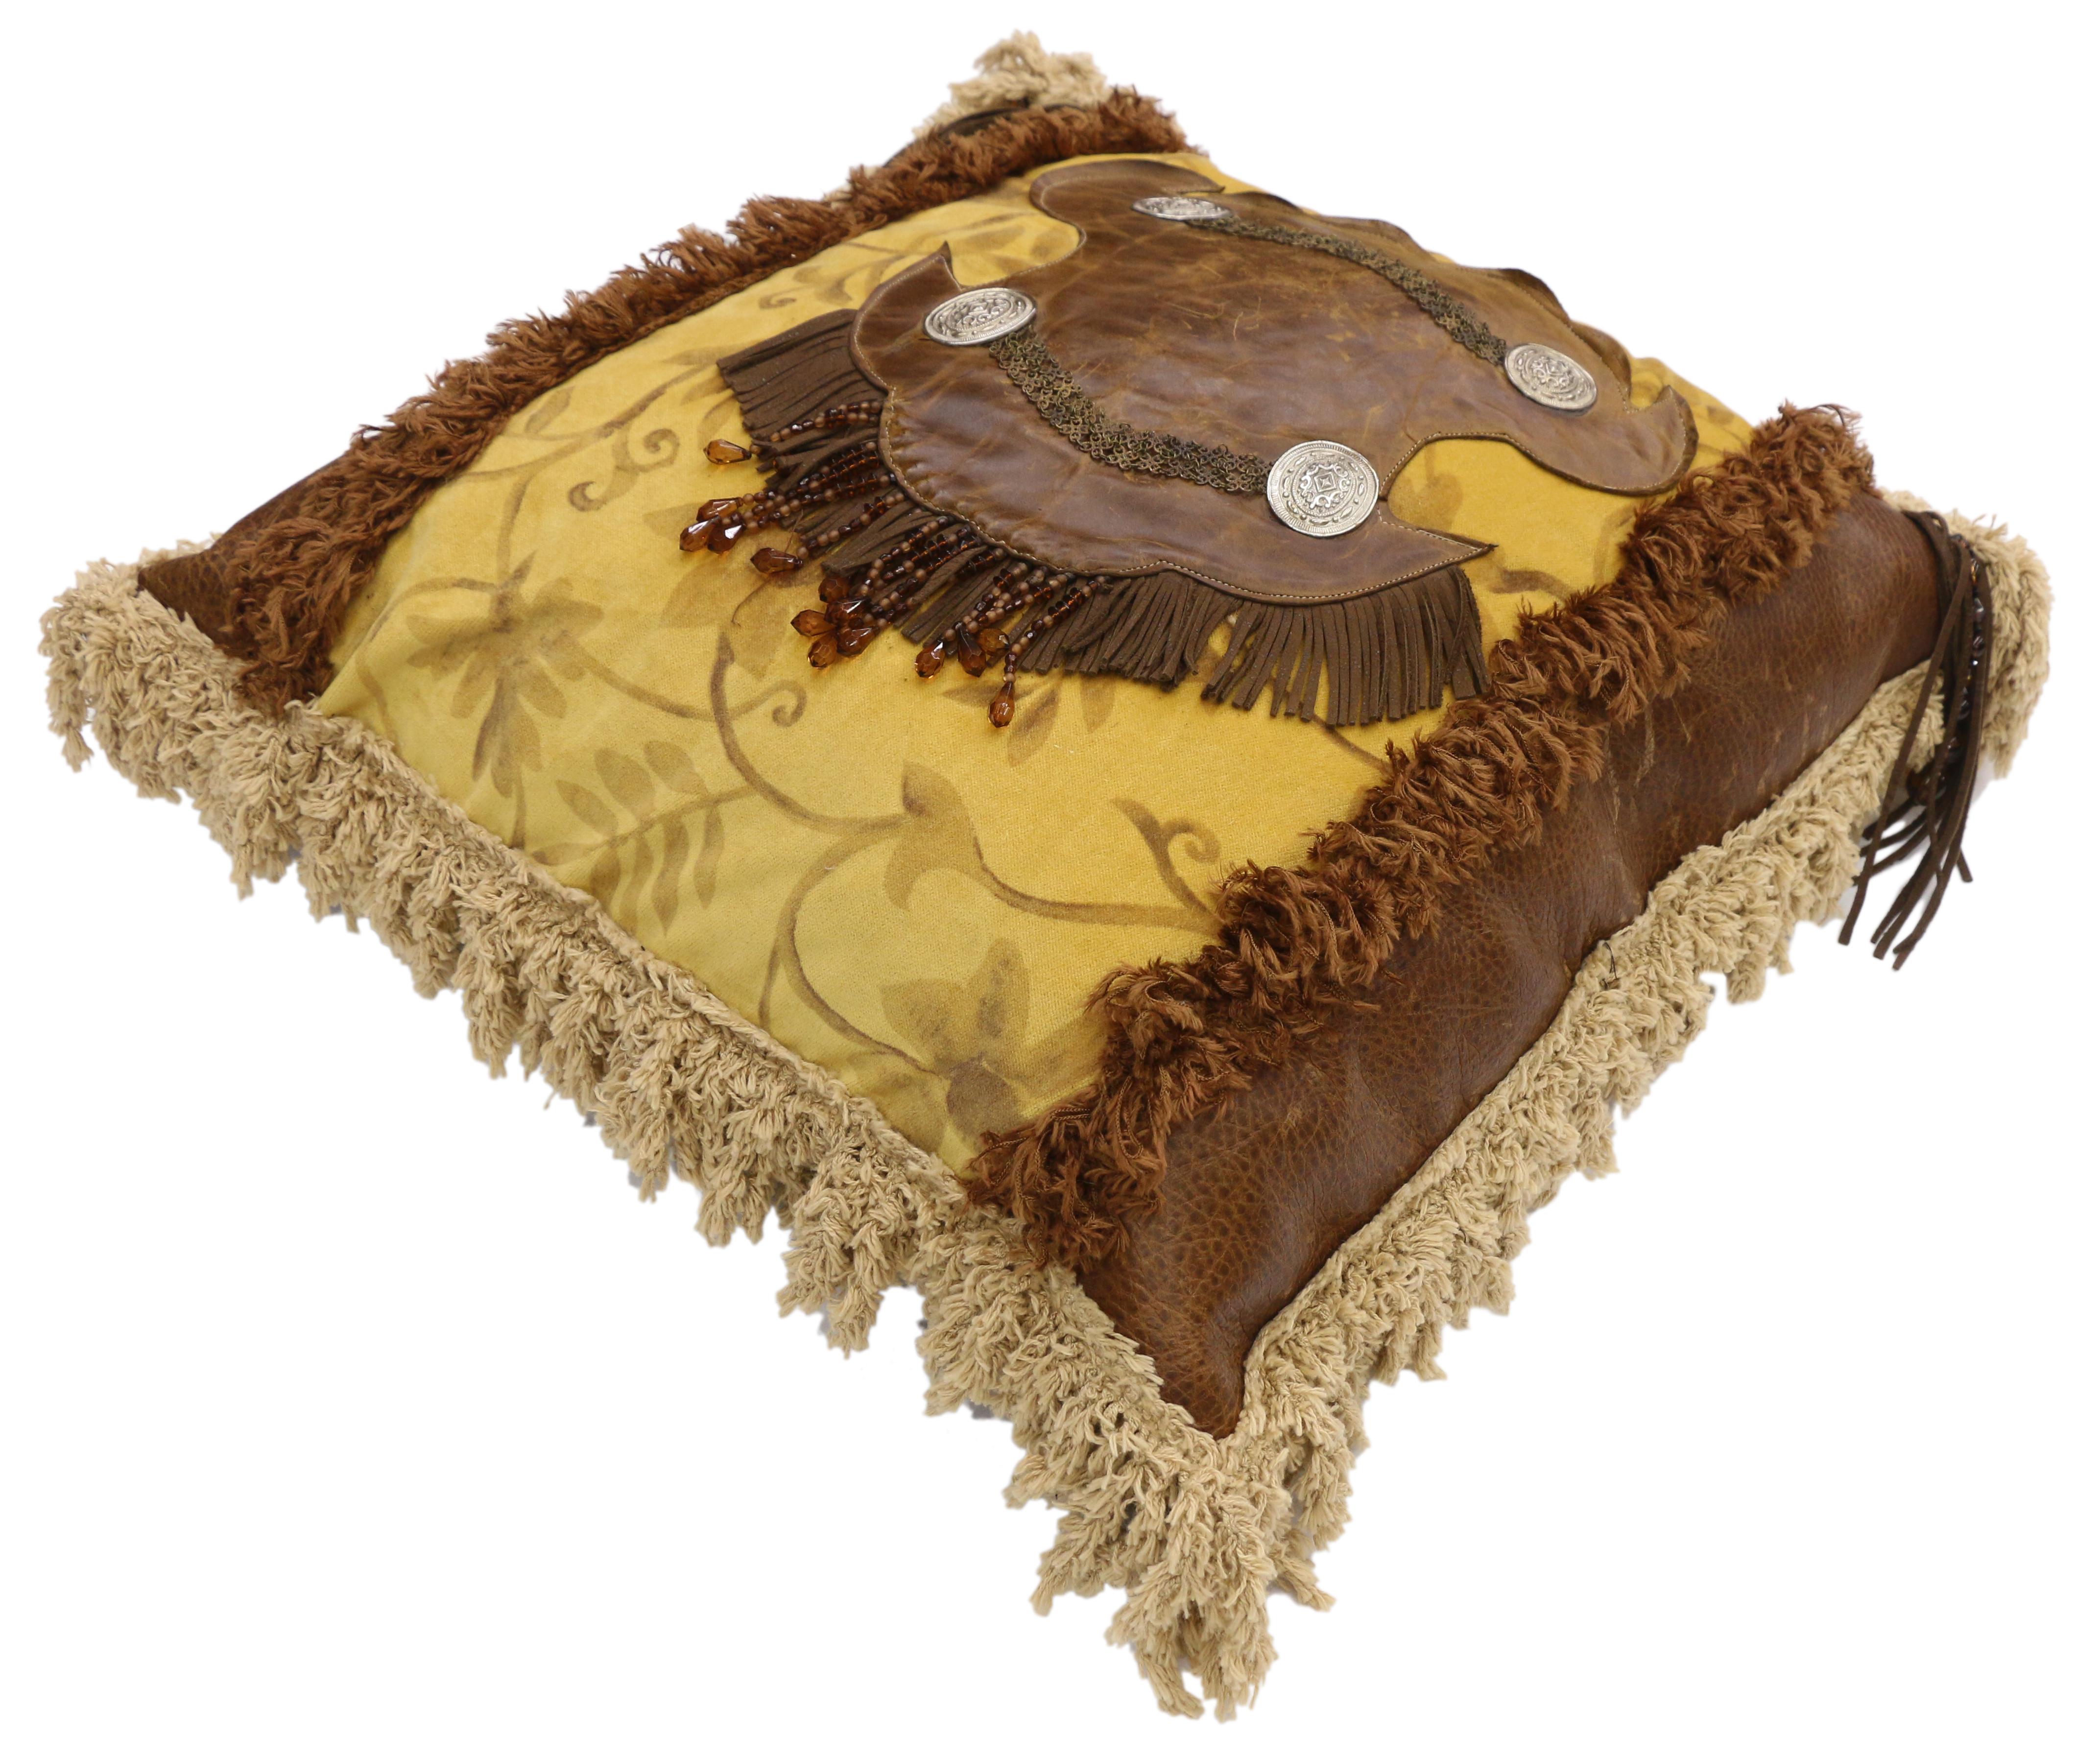 Western Rockabilly style leather throw pillow with fringe and tassels. This Western style throw pillow features a golden yellow fabric backdrop with a leather centerpiece adorned metal accents, fringe, and beads. The golden yellow center is flanked